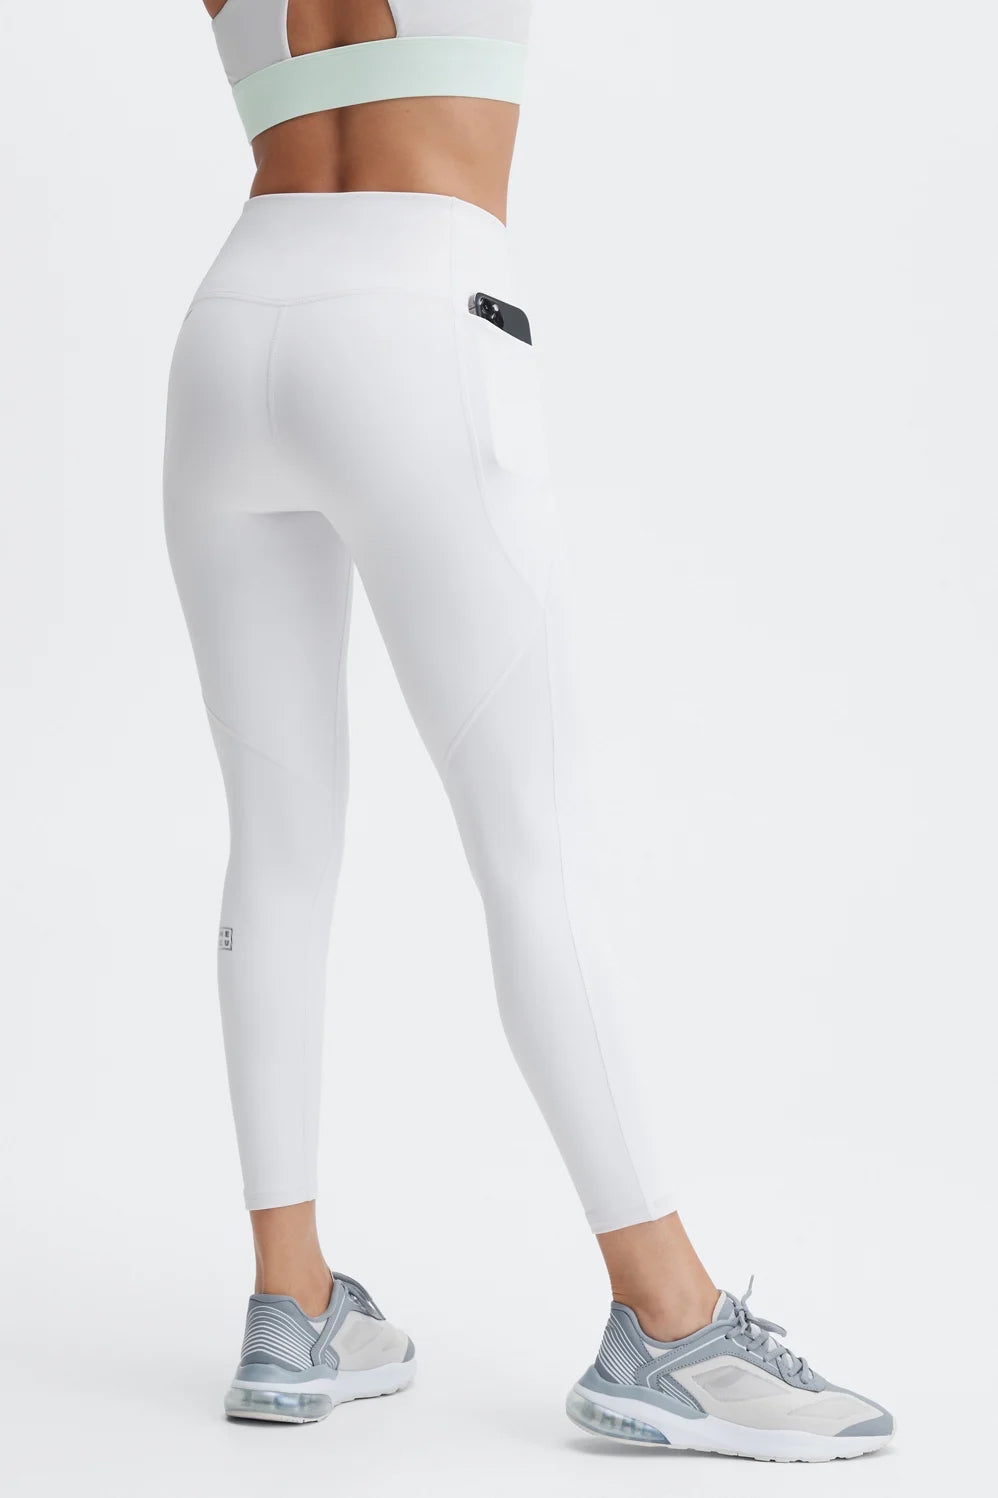 White crossover leggings with pockets